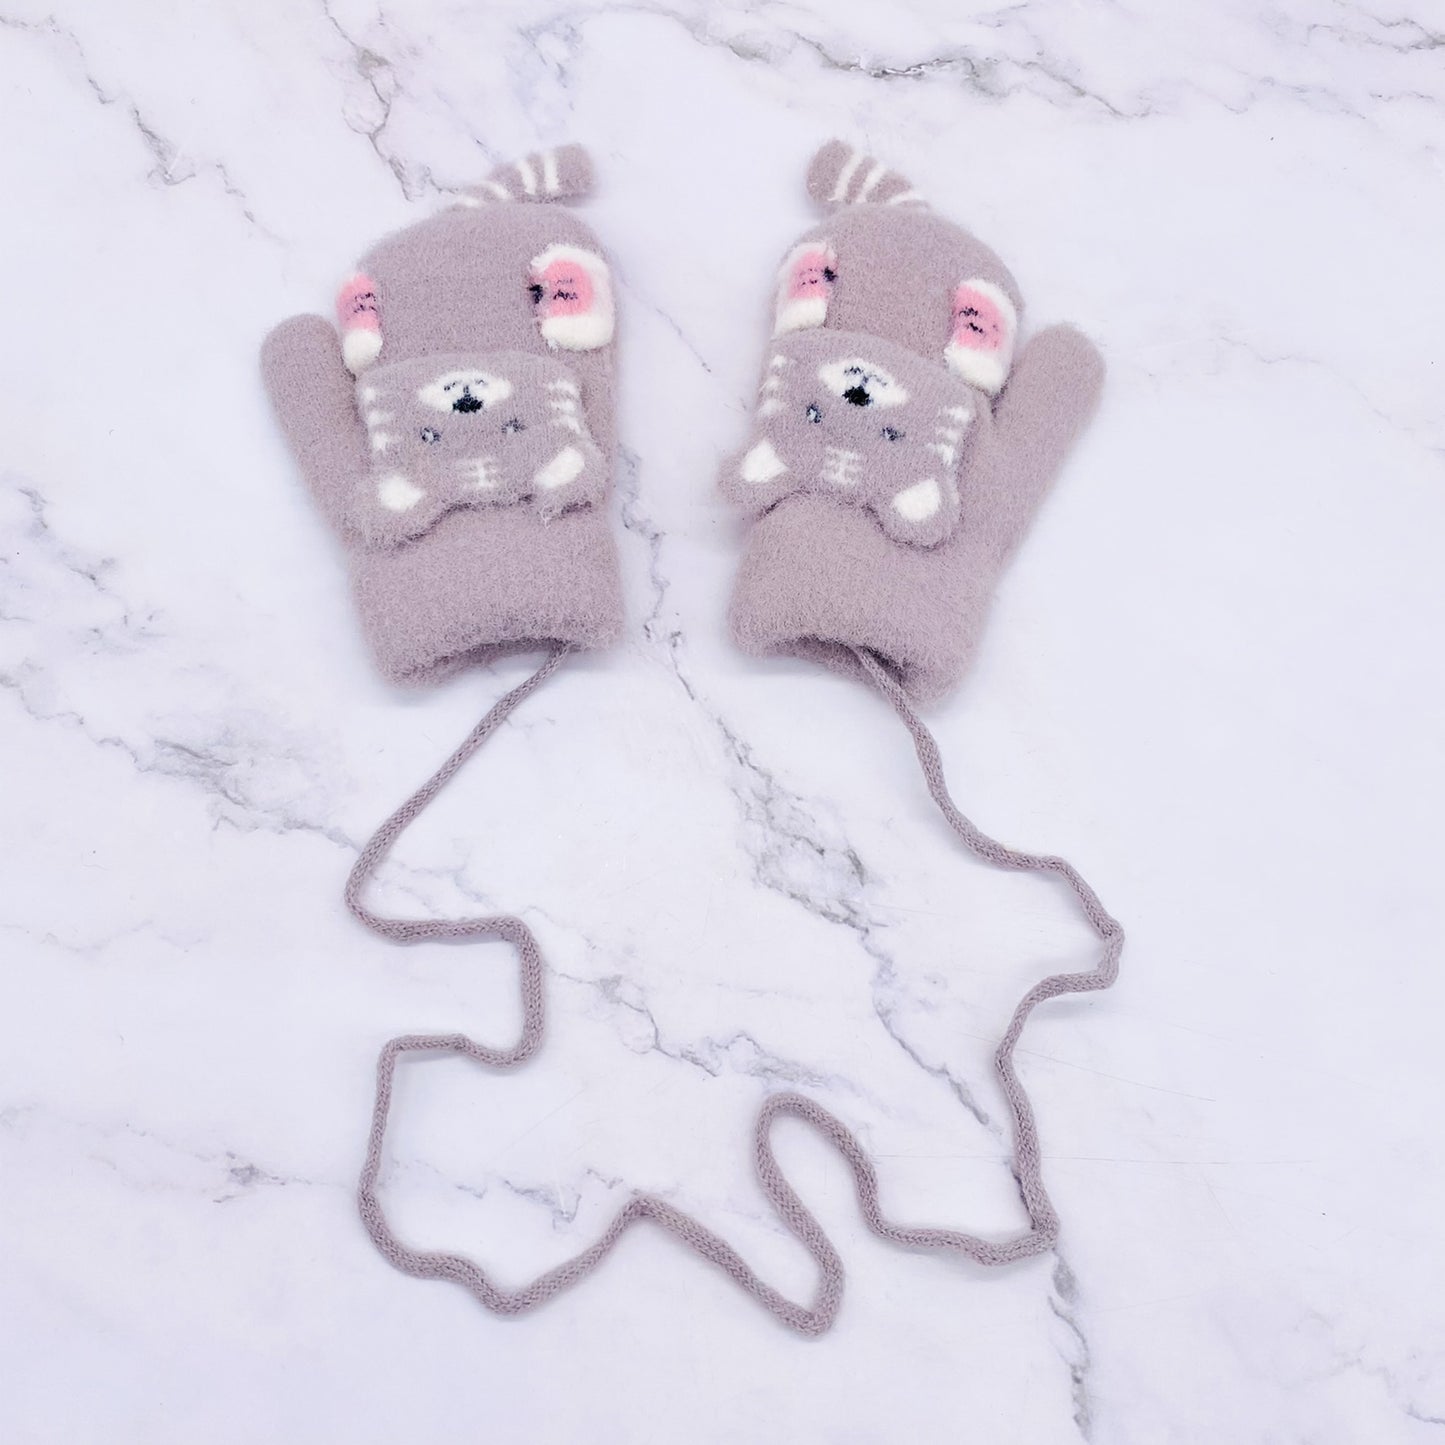 Fleece Lined Animal Lover Mittens/Gloves  with Strings